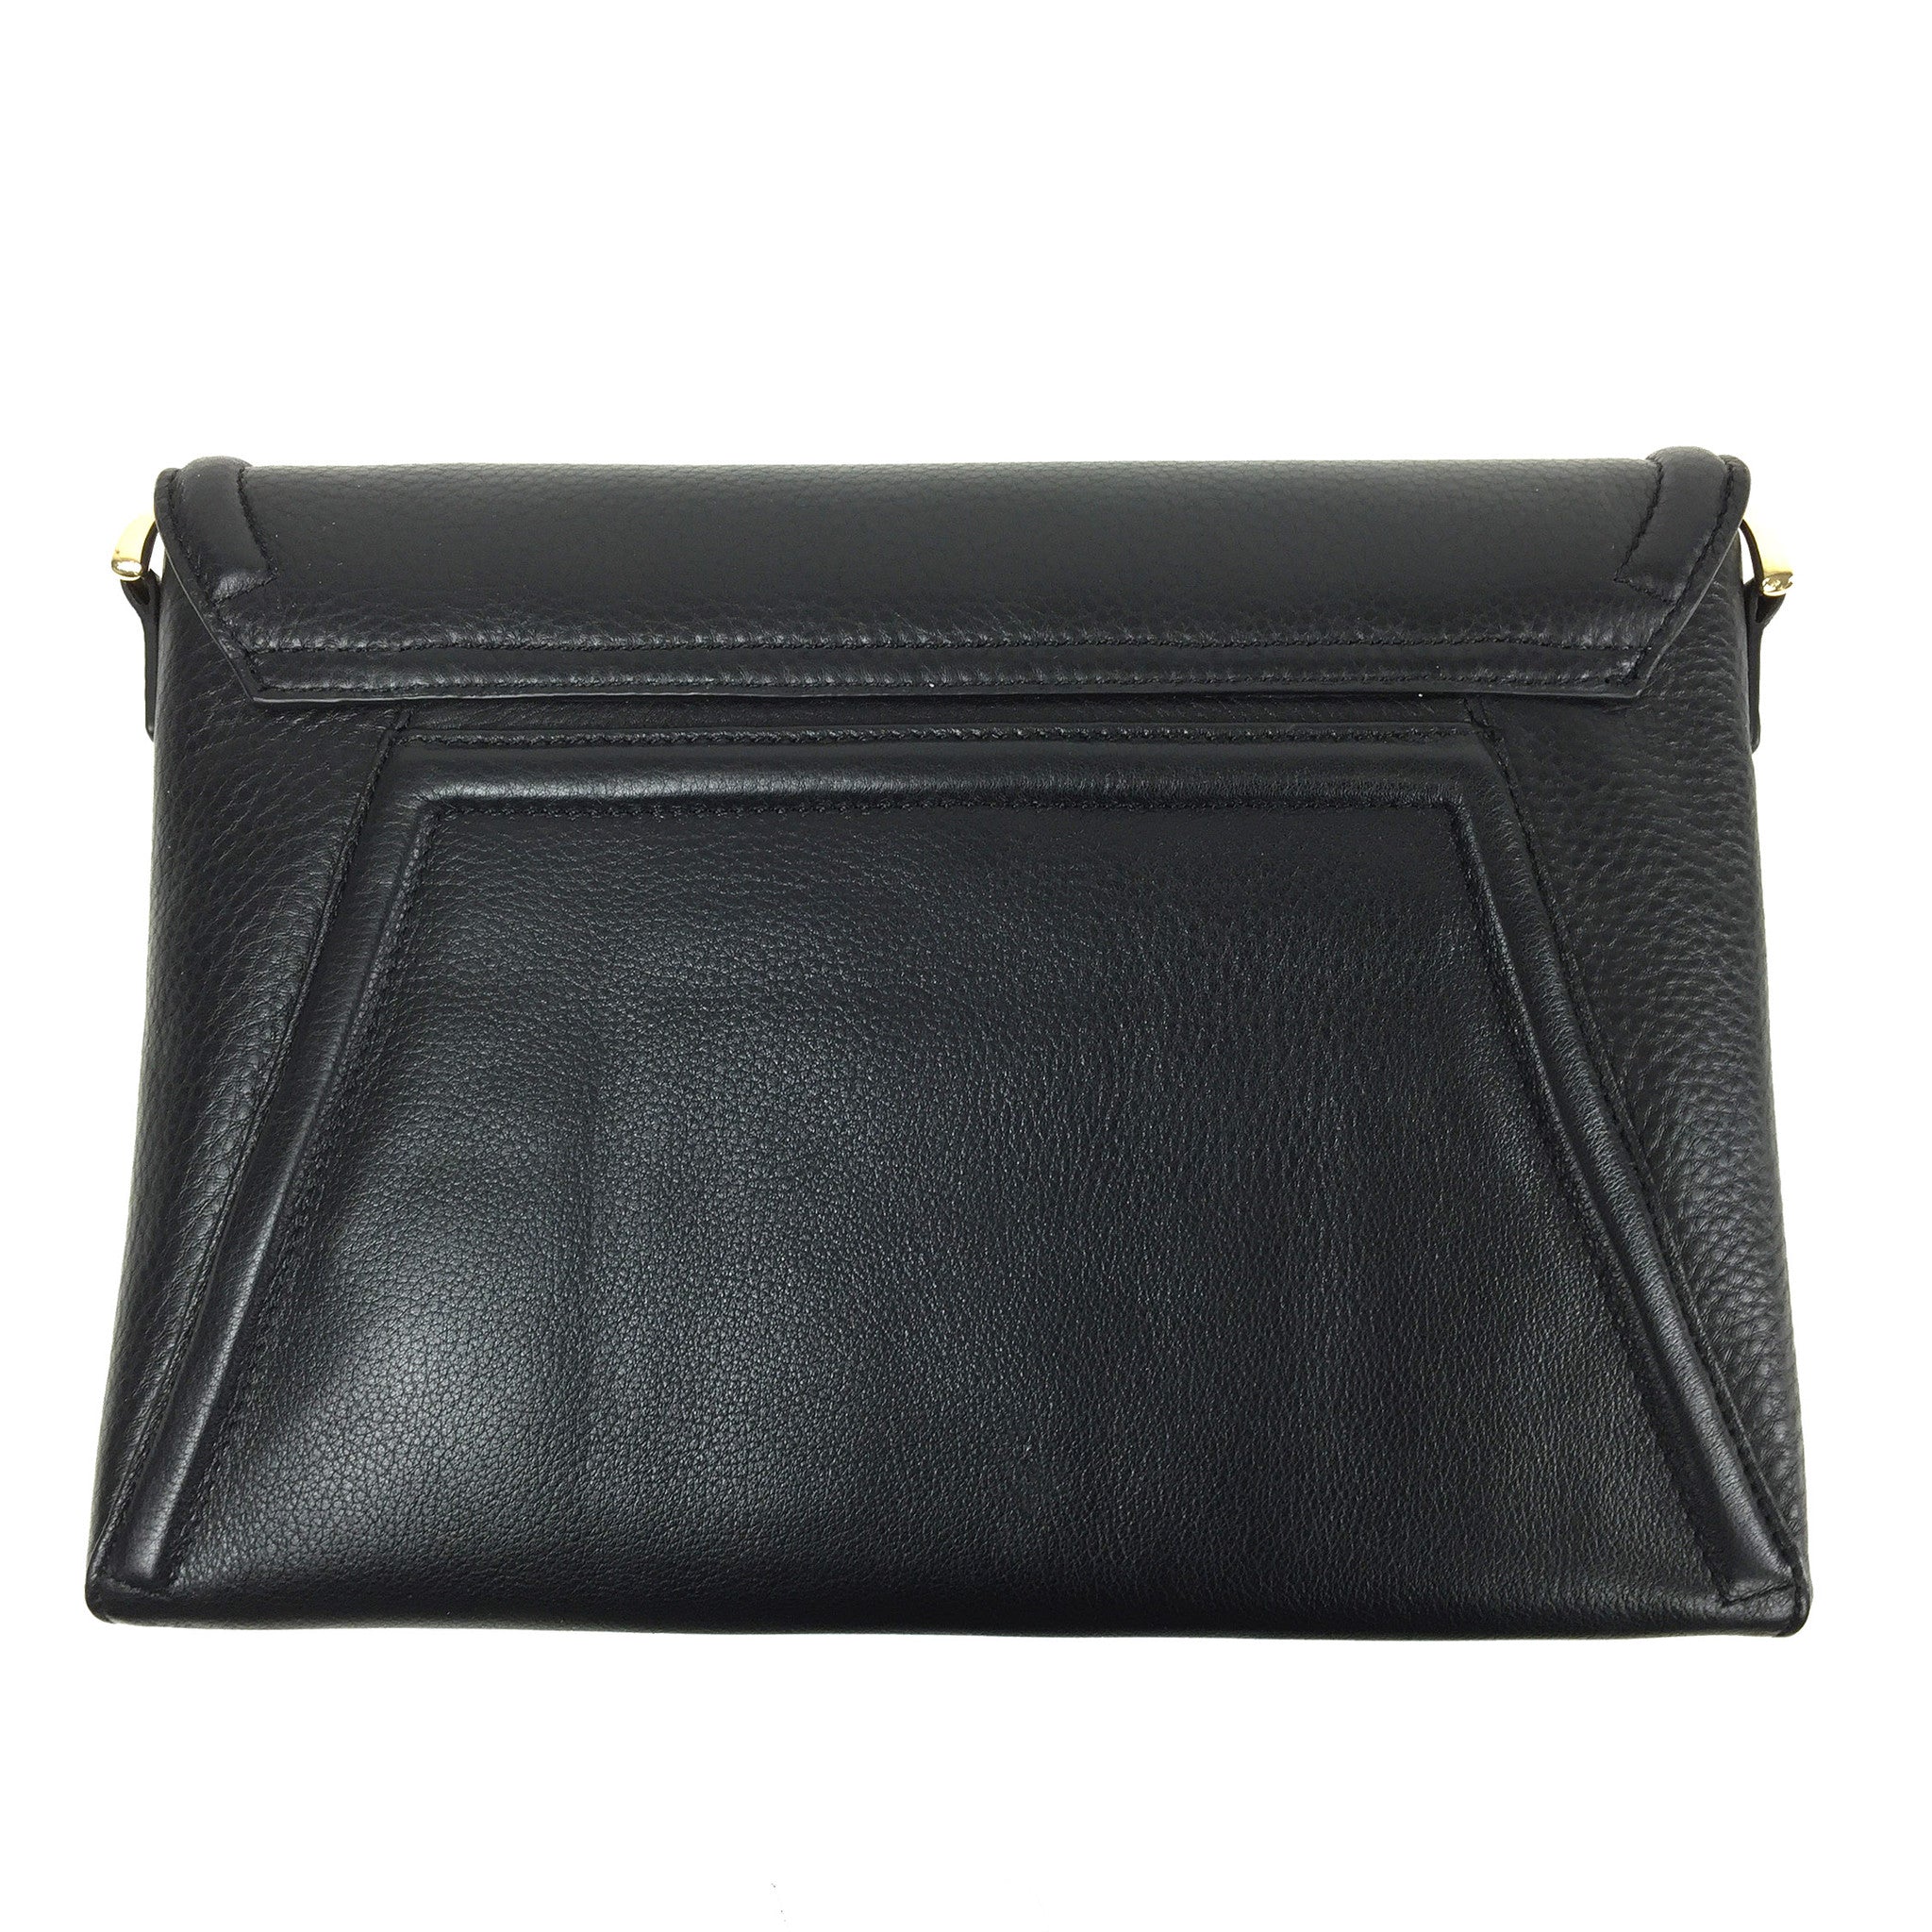 Claudette Clutch in Black Onyx with built-in LED light – Chinyere Ugoji